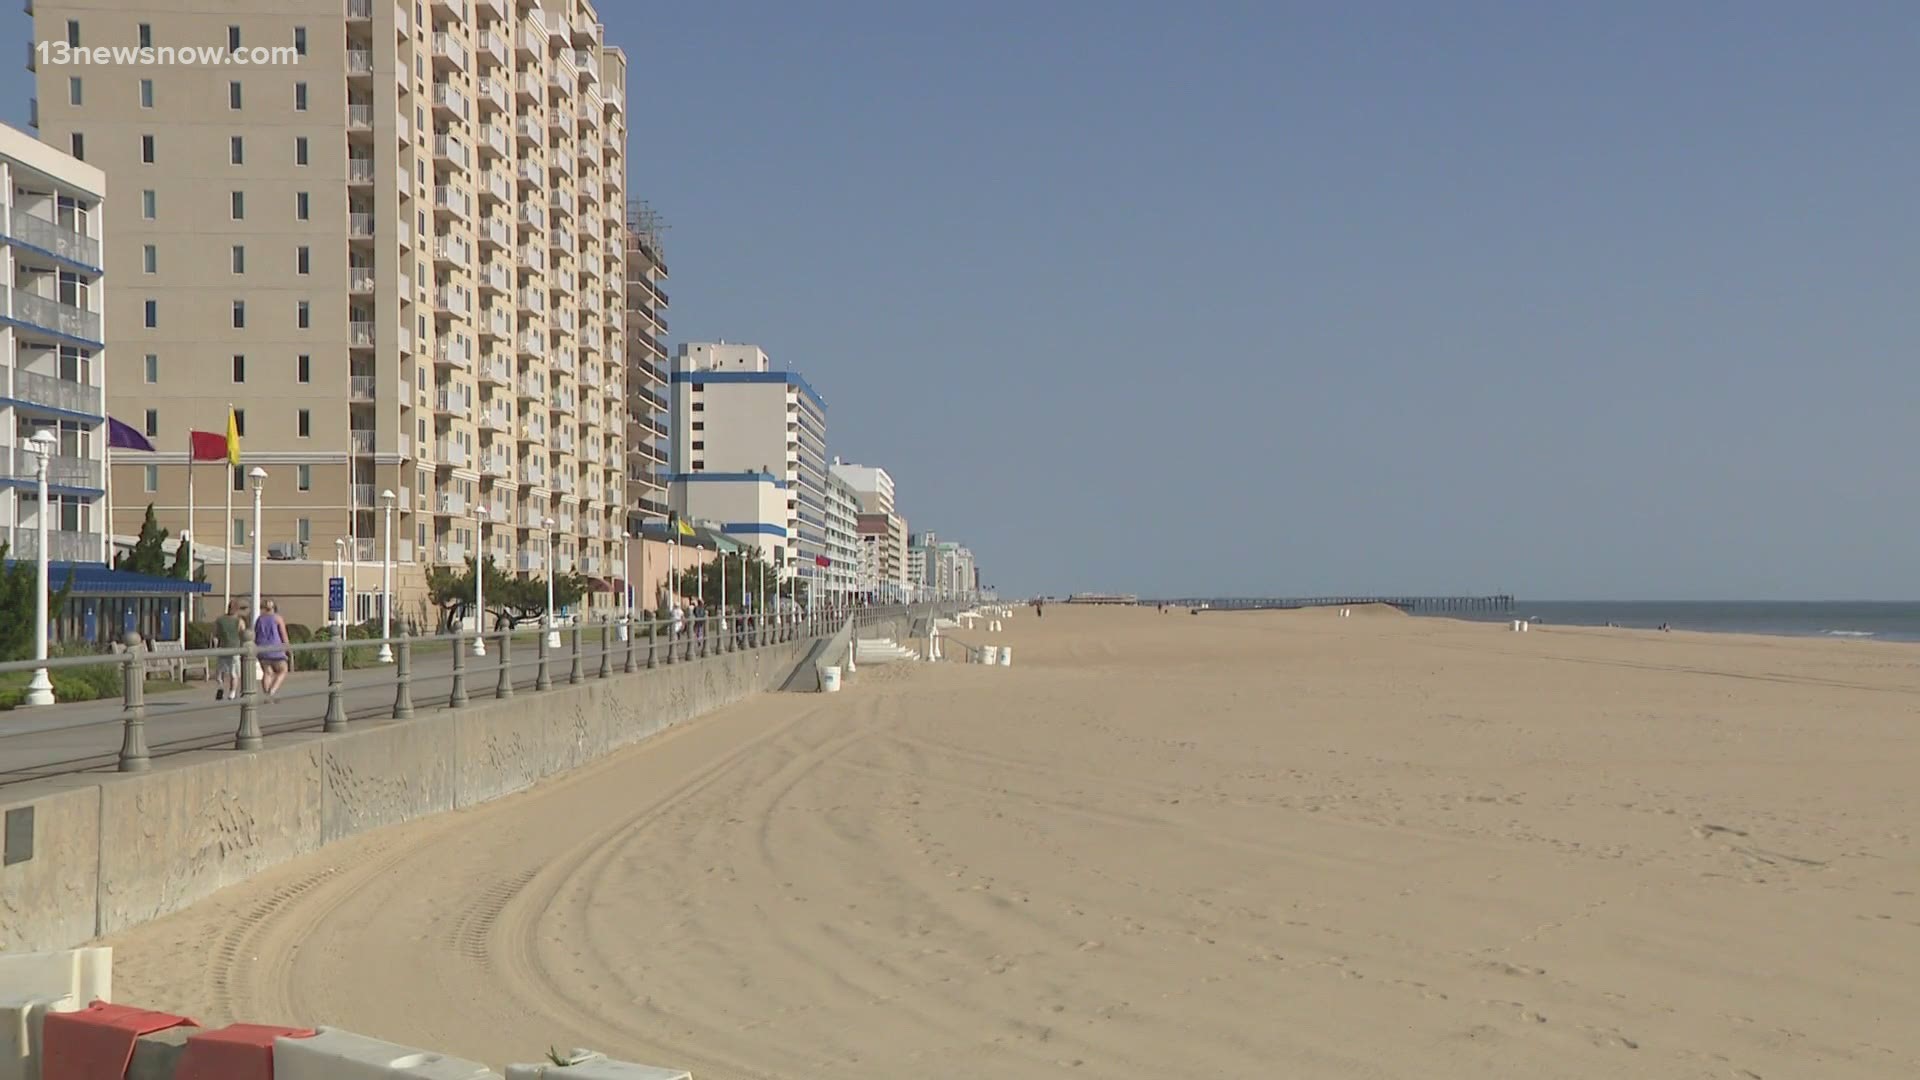 13News Now Anne Sparaco caught up with the organizers of a cleanup event for Earth Day where volunteers will head to the Oceanfront to clean the beach!